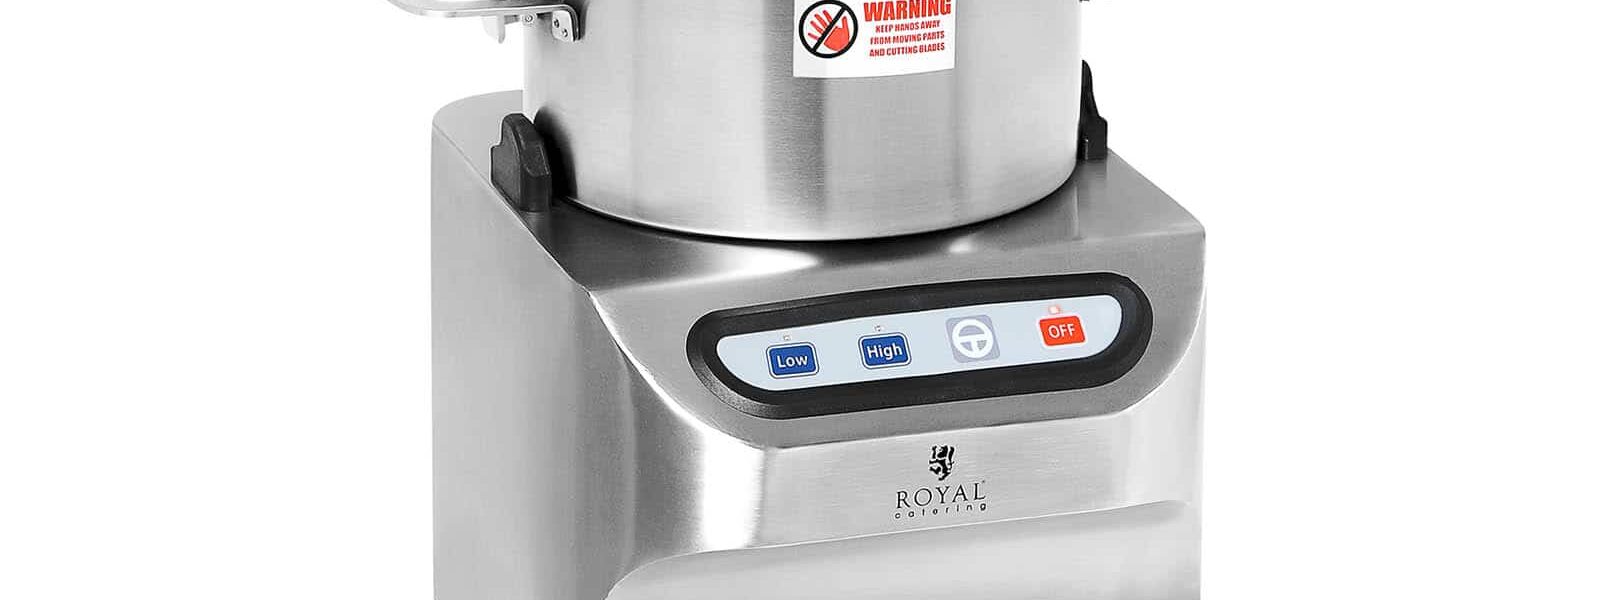 Occasion Cutter cuisine – 1500/2800 tr/min – Royal Catering – 5 l